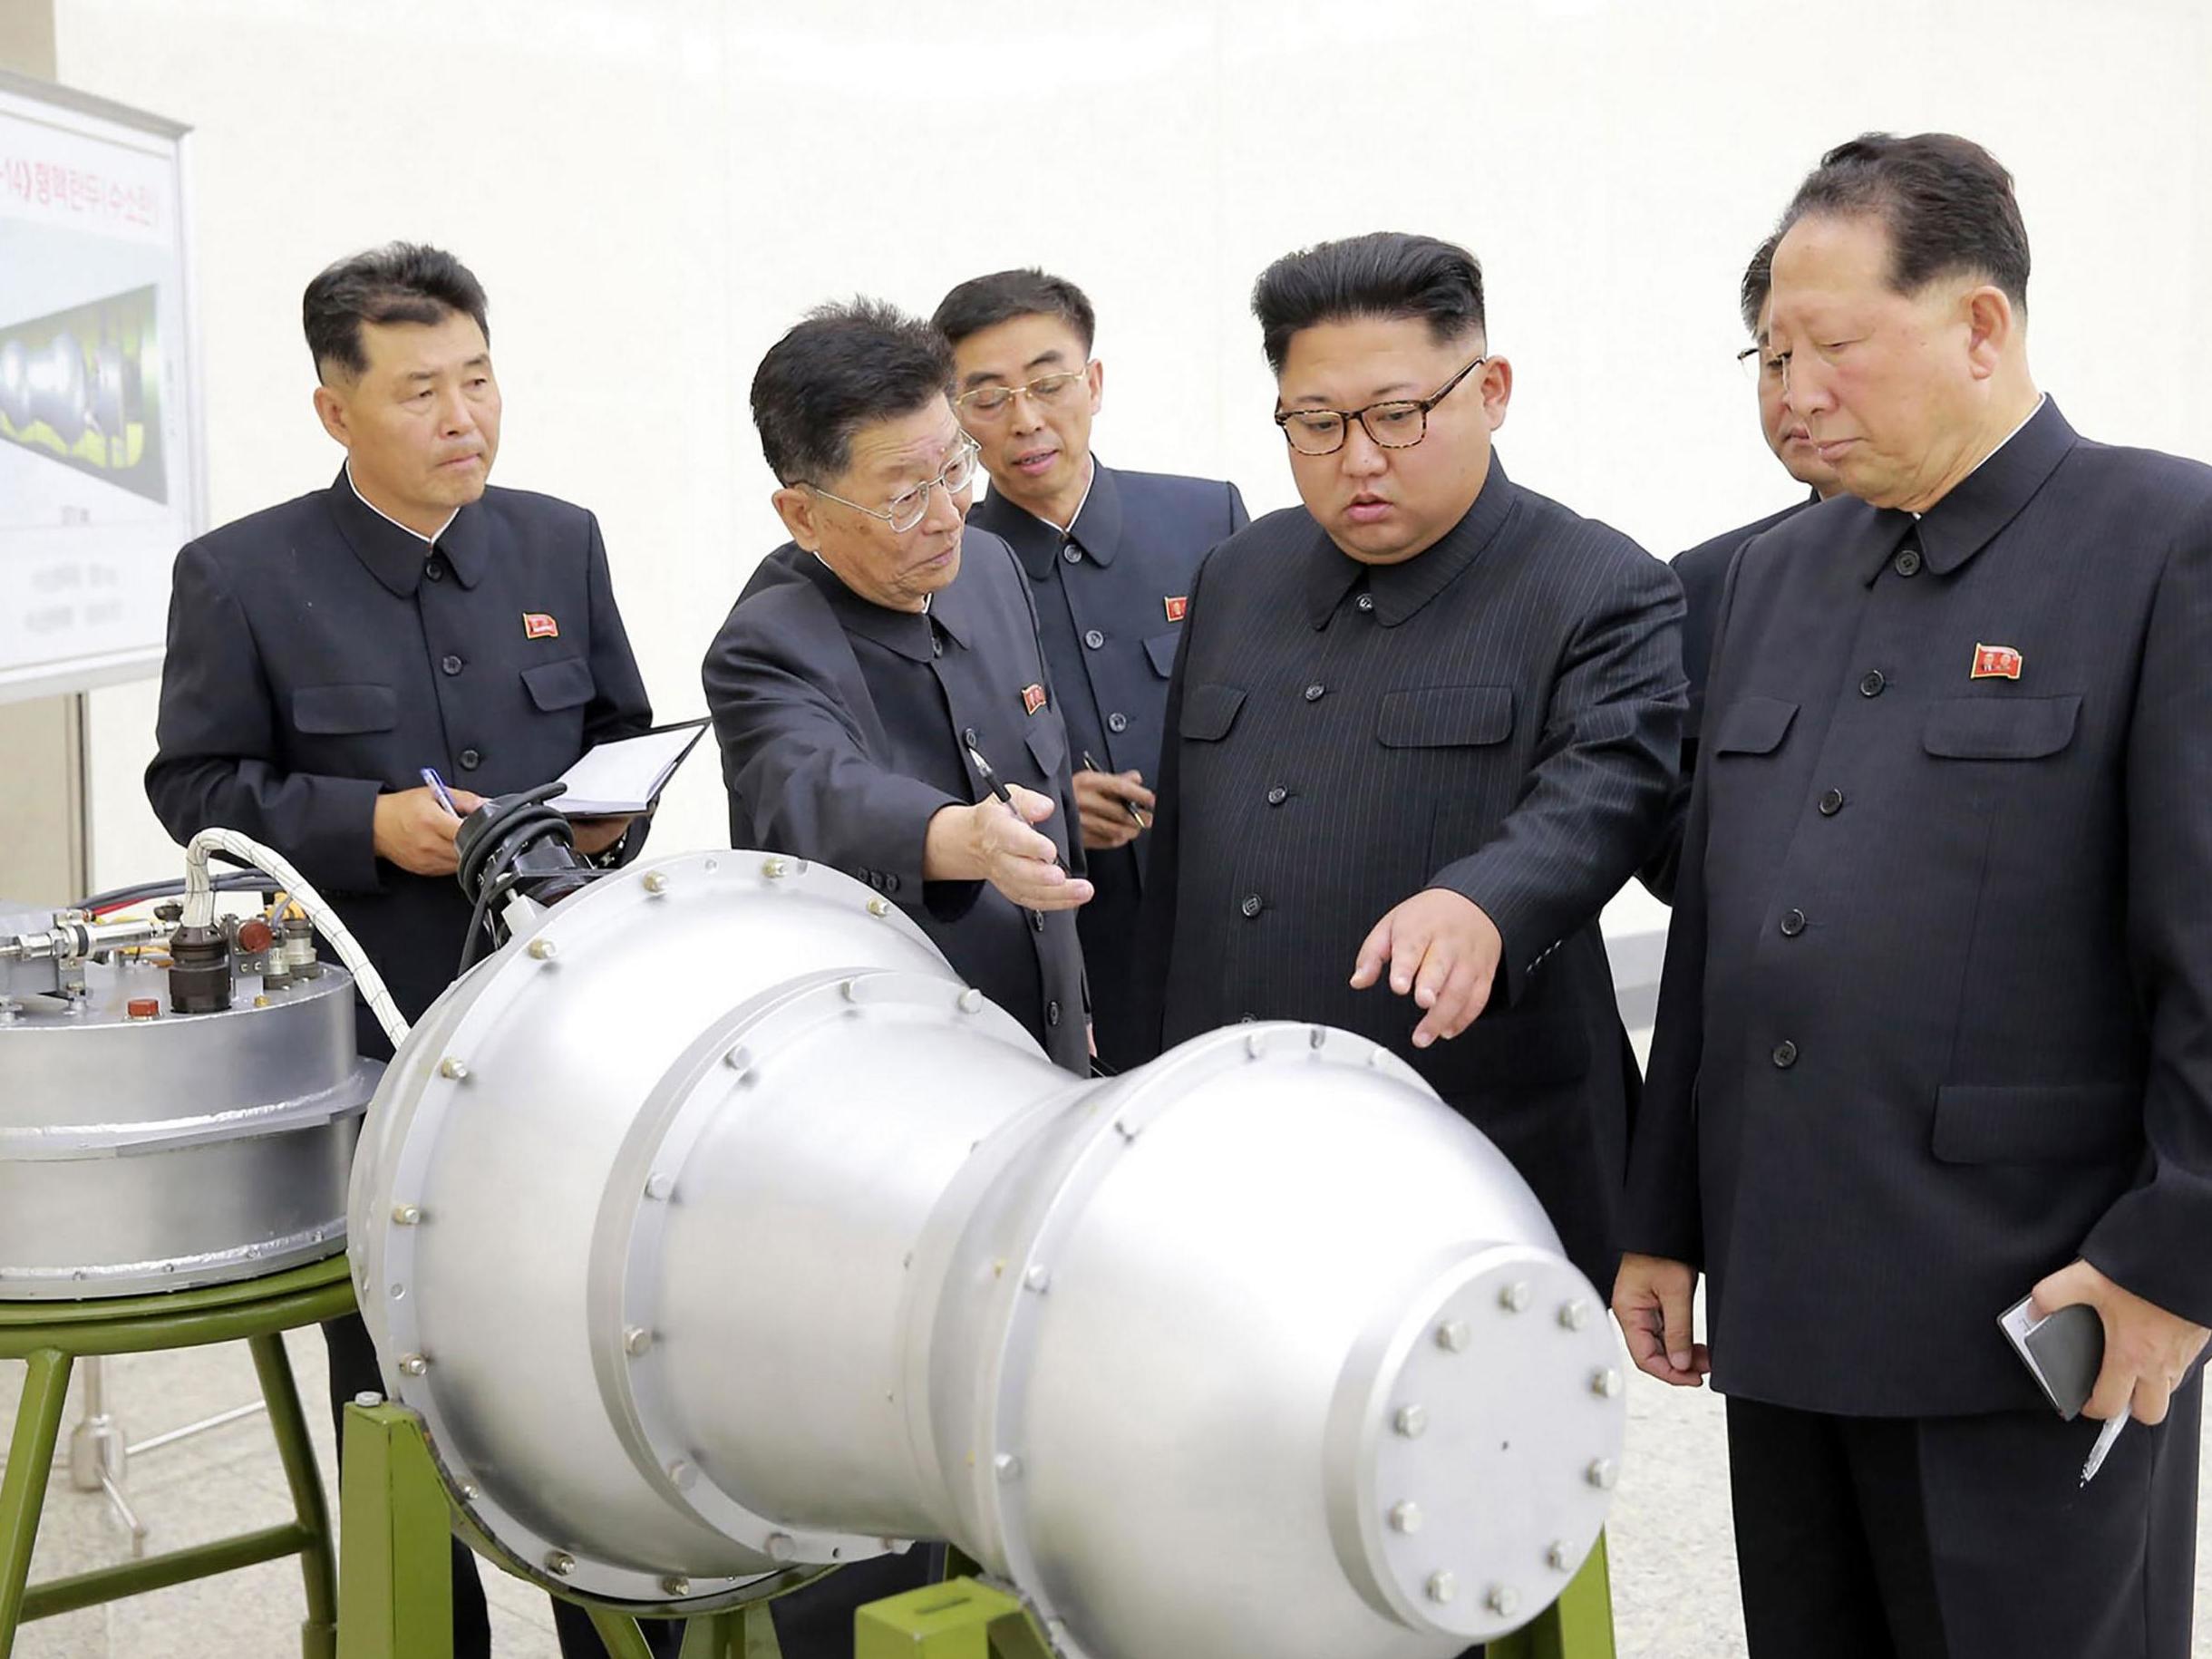 Kim Jong-Un inspects what is purported to be a nuclear device